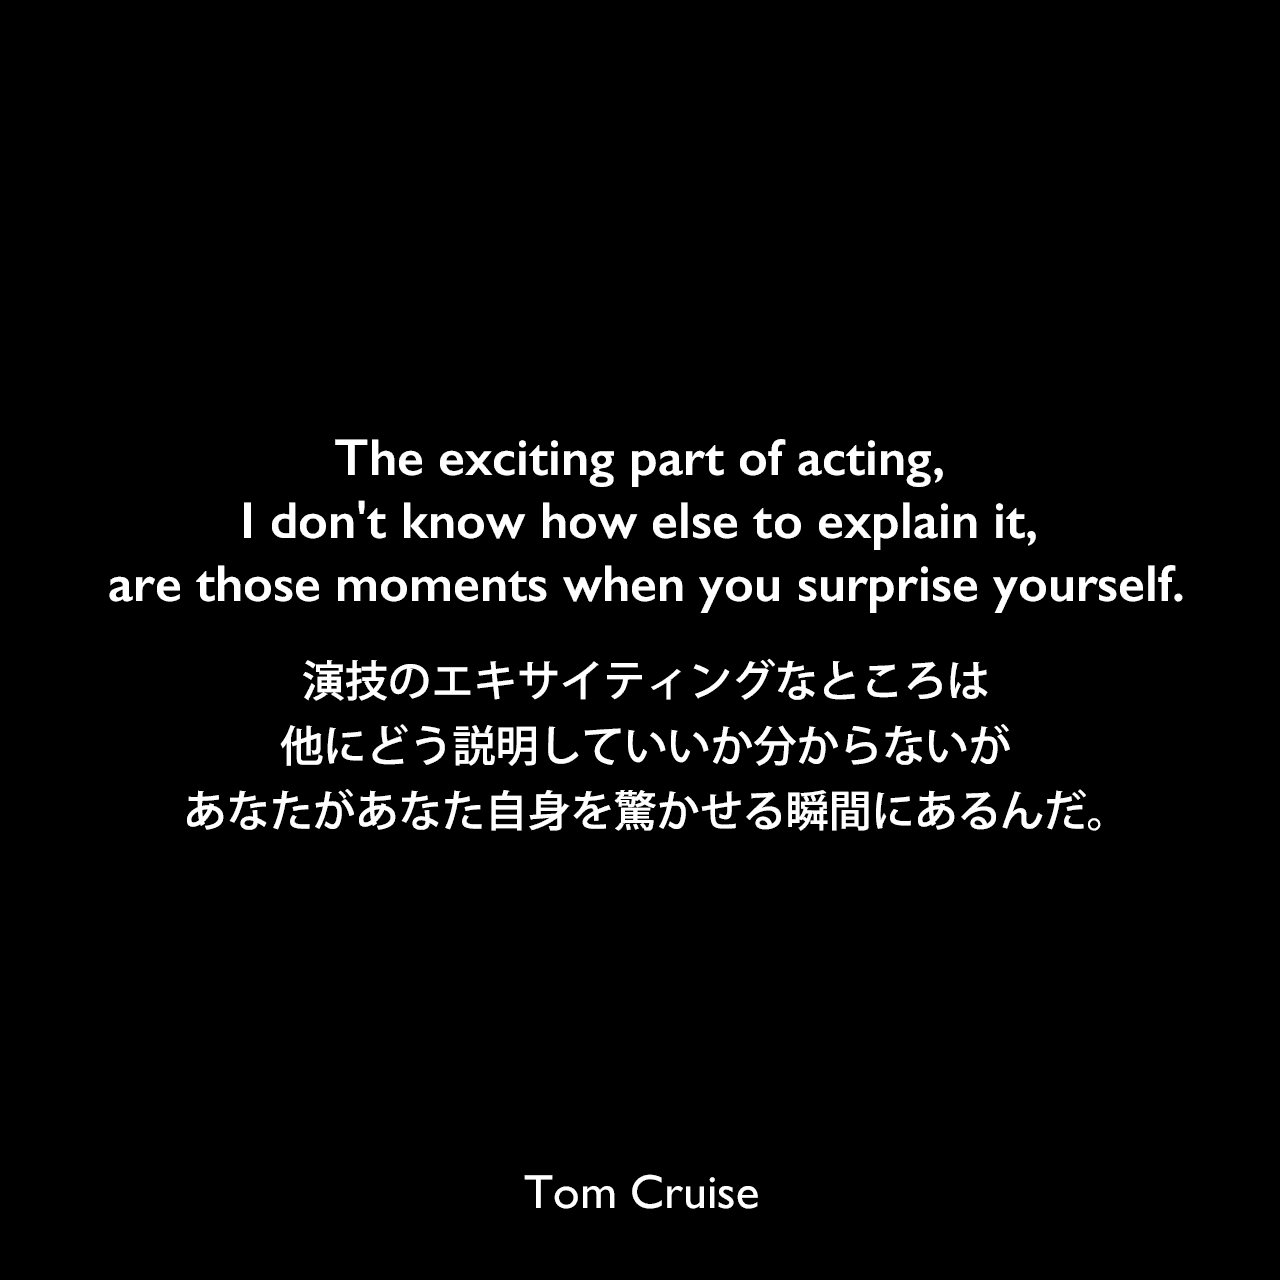 The exciting part of acting, I don't know how else to explain it, are those moments when you surprise yourself.演技のエキサイティングなところは、他にどう説明していいか分からないが、あなたがあなた自身を驚かせる瞬間にあるんだ。Tom Cruise